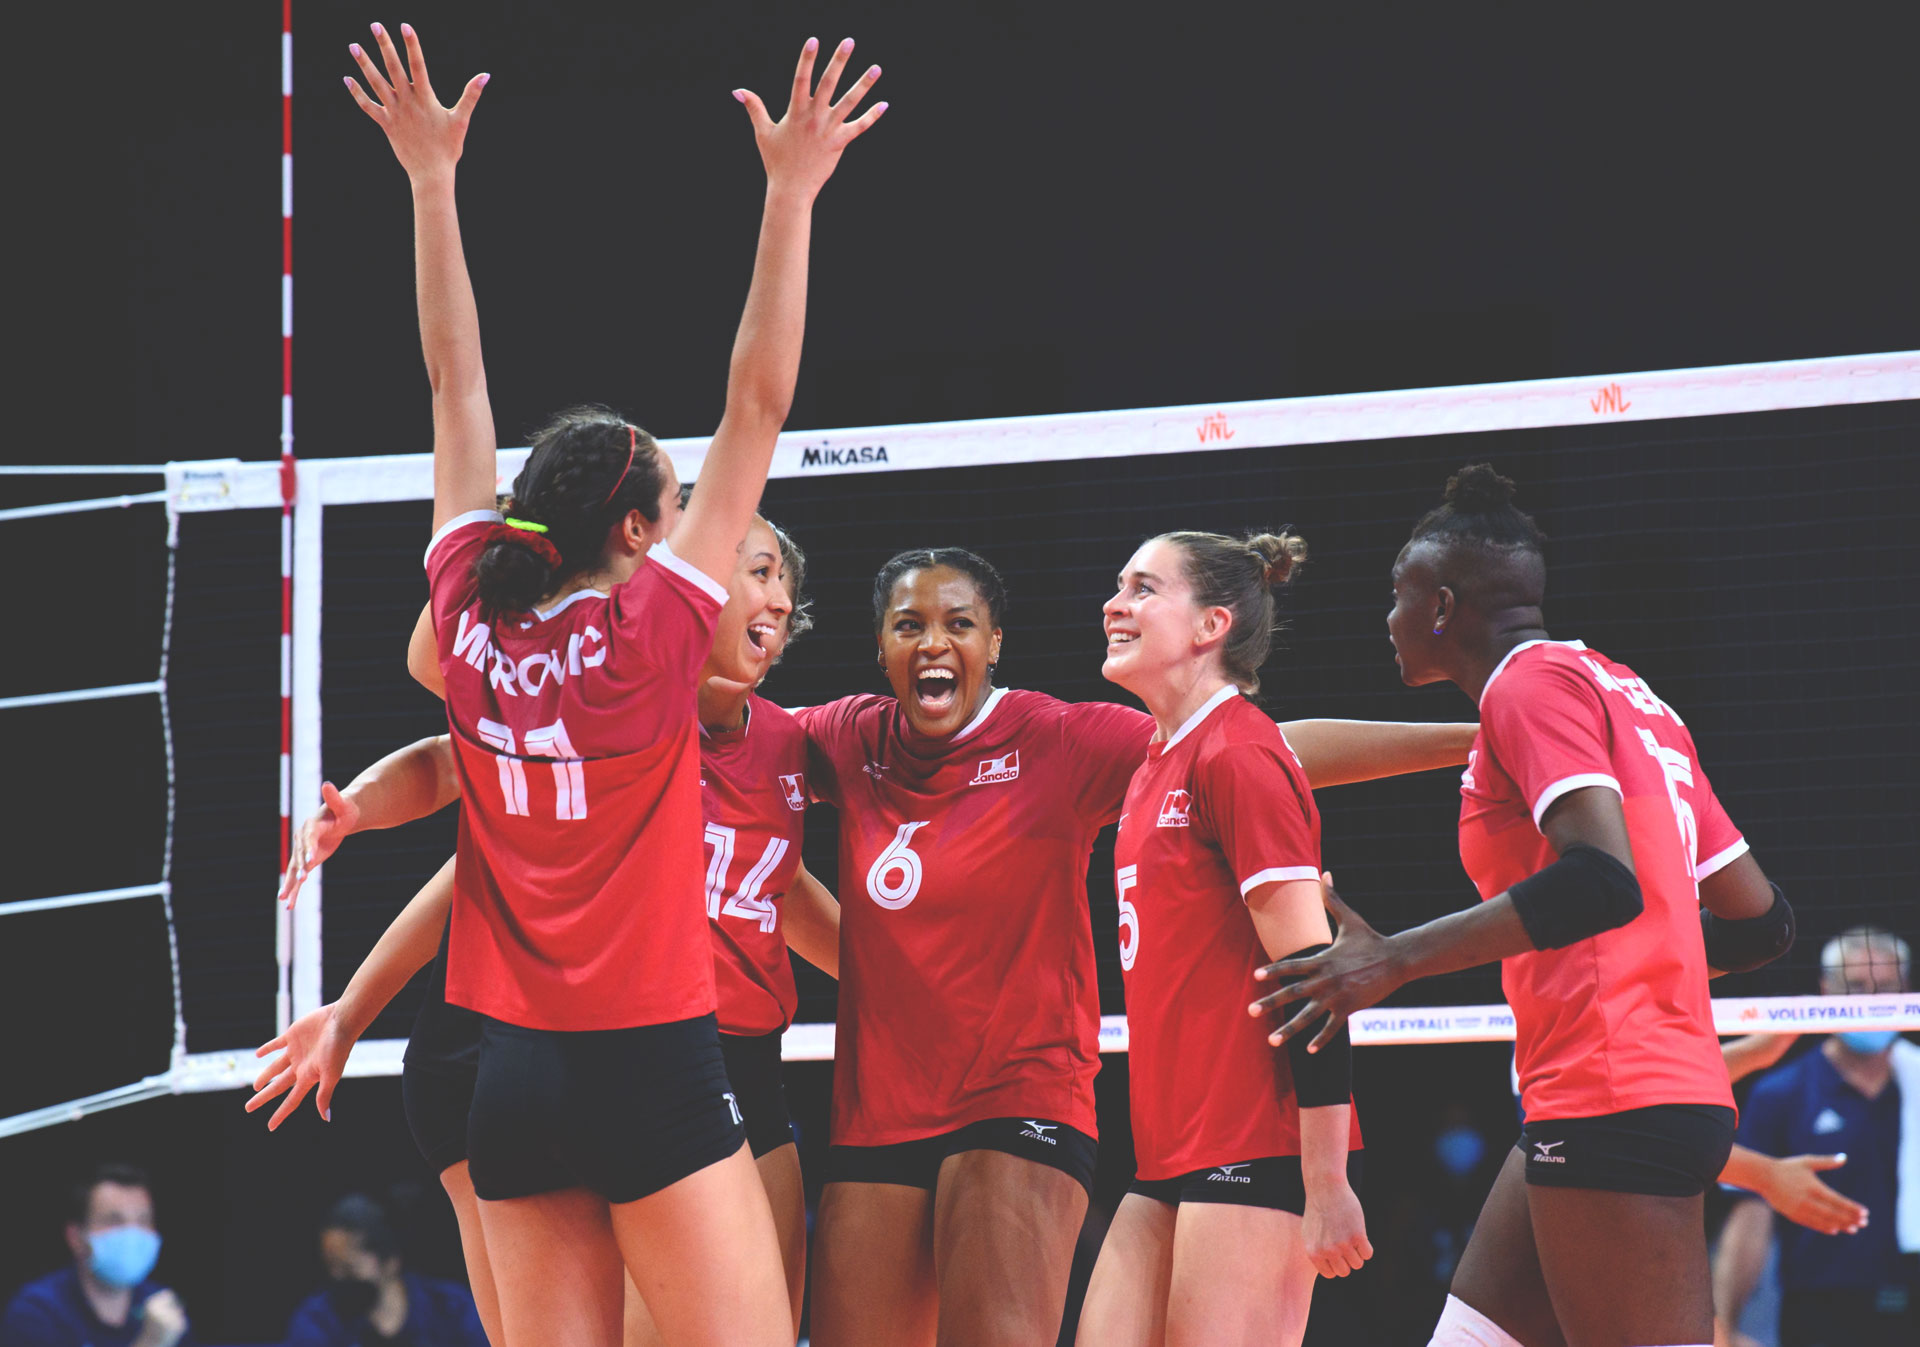 Women’s Volleyball Nations League.